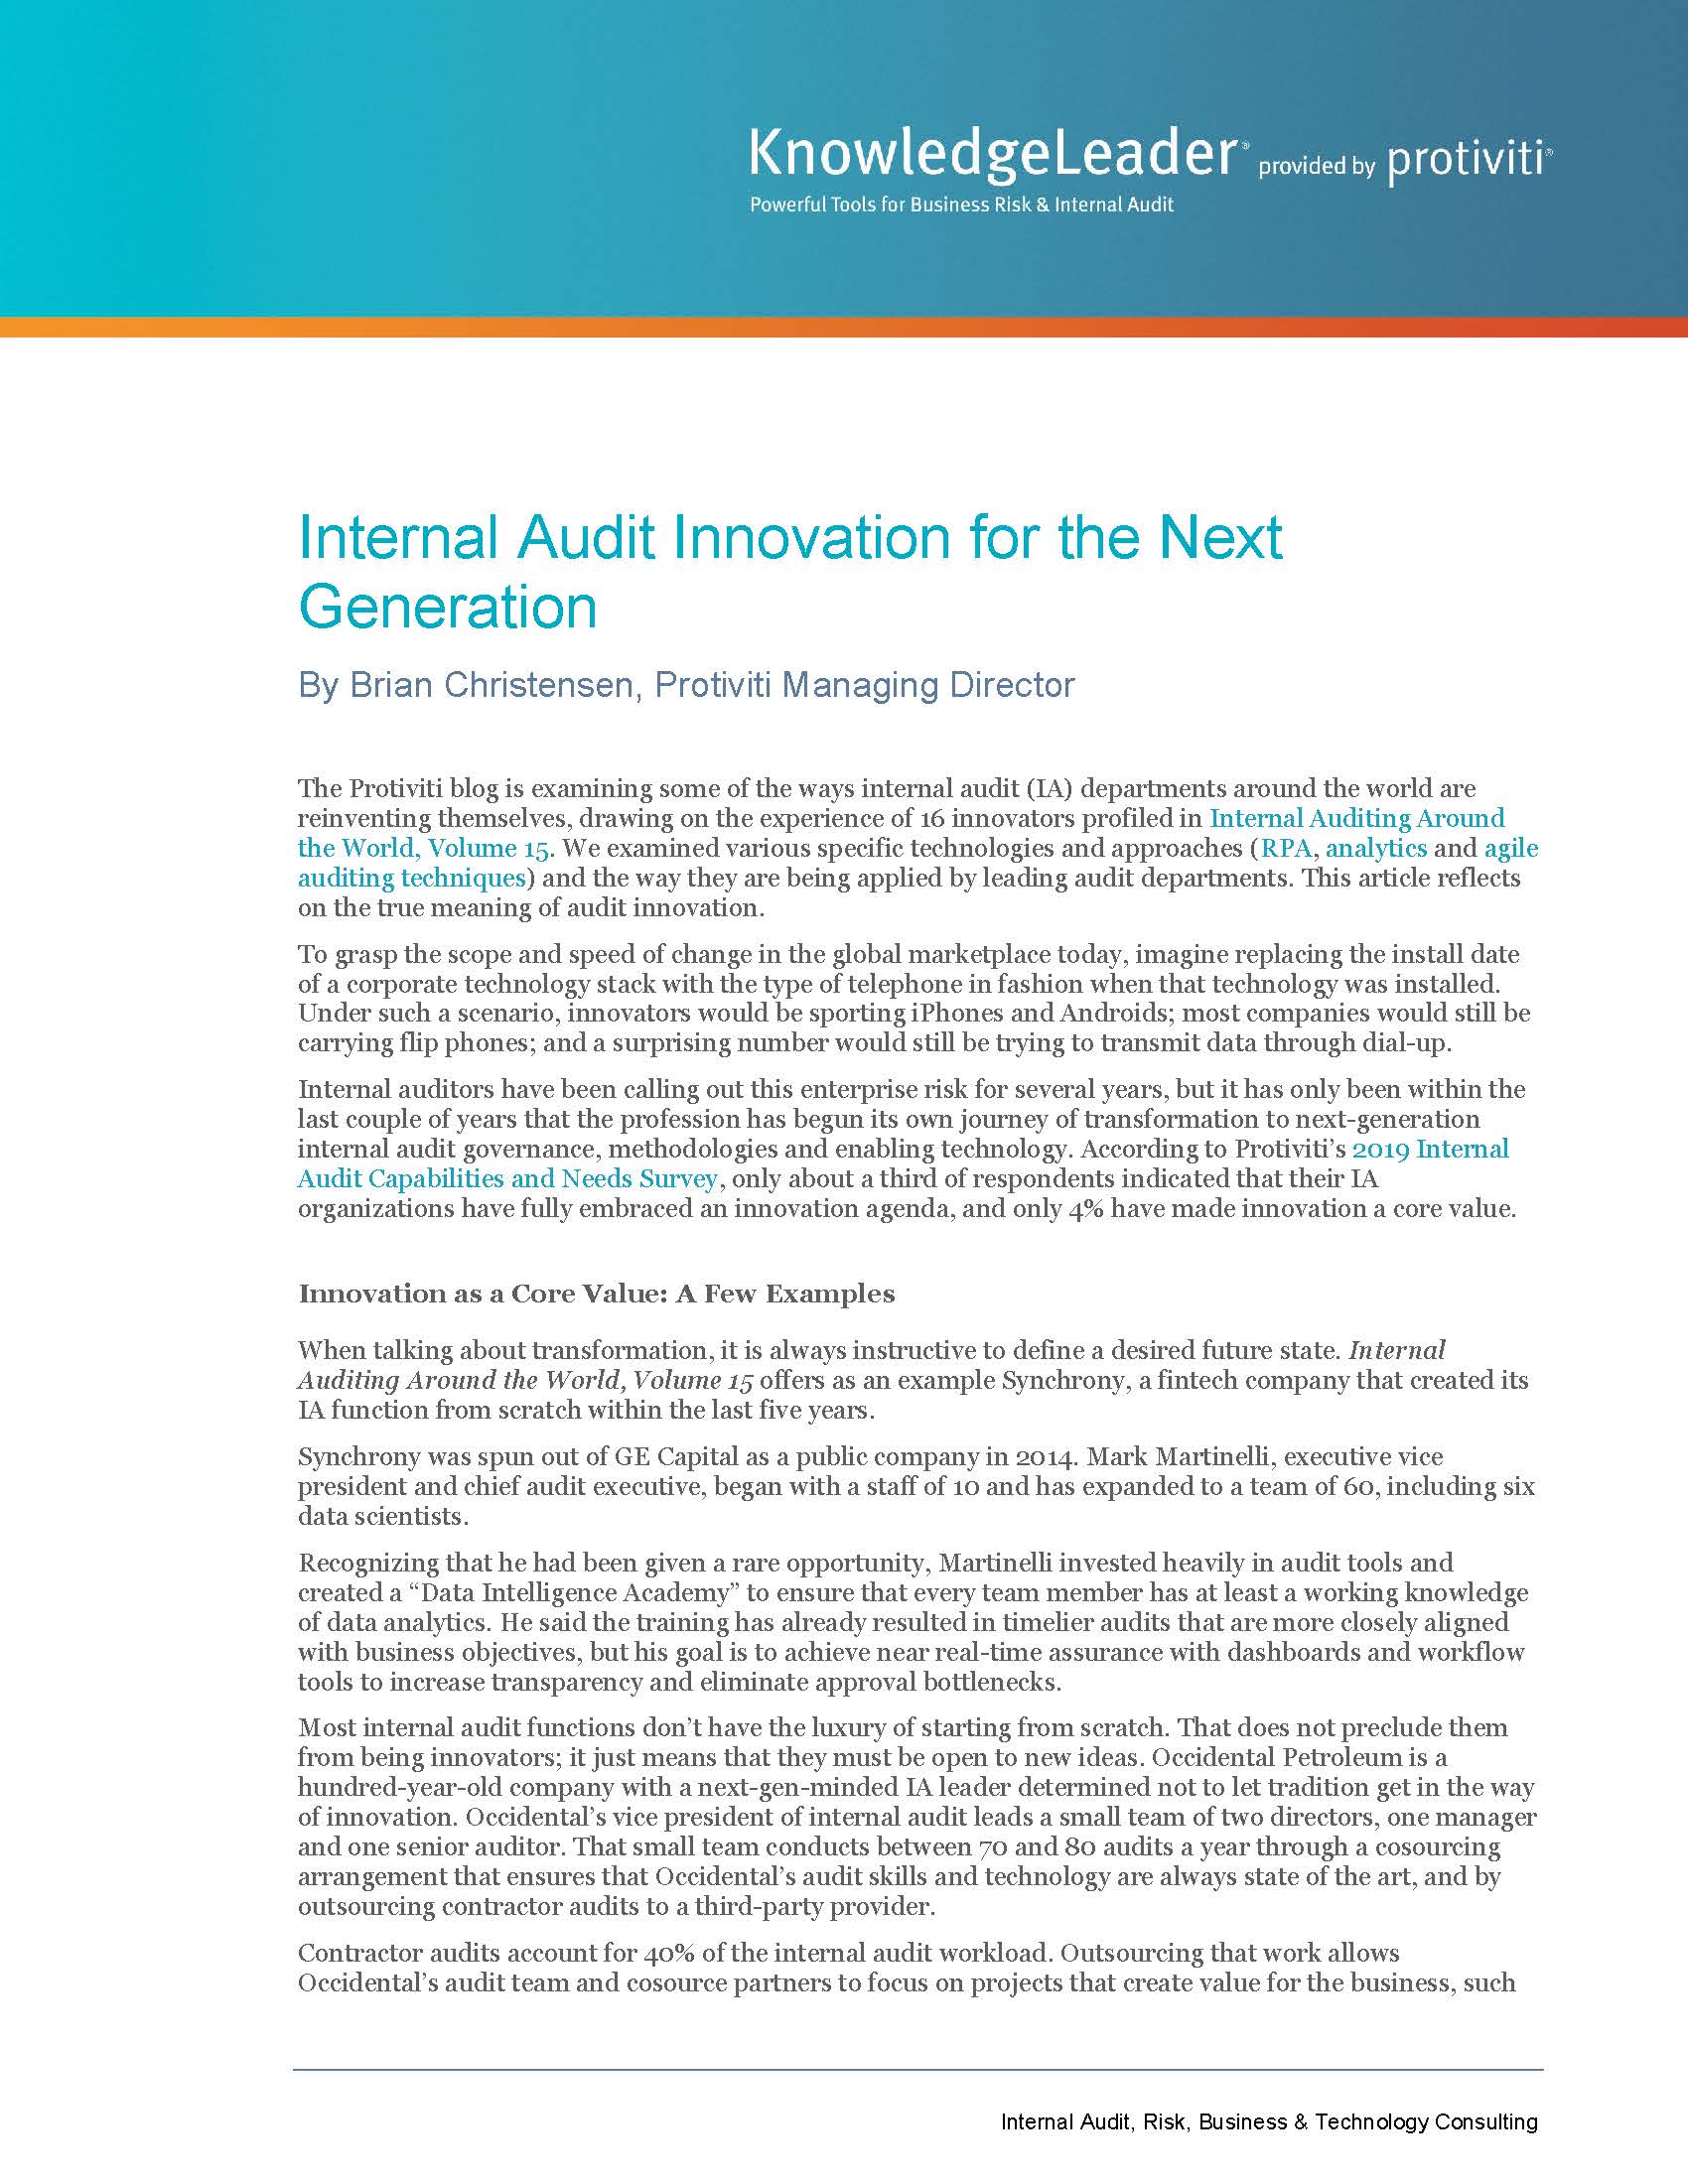 Screenshot of the first page of Internal Audit Innovation for the Next Generation